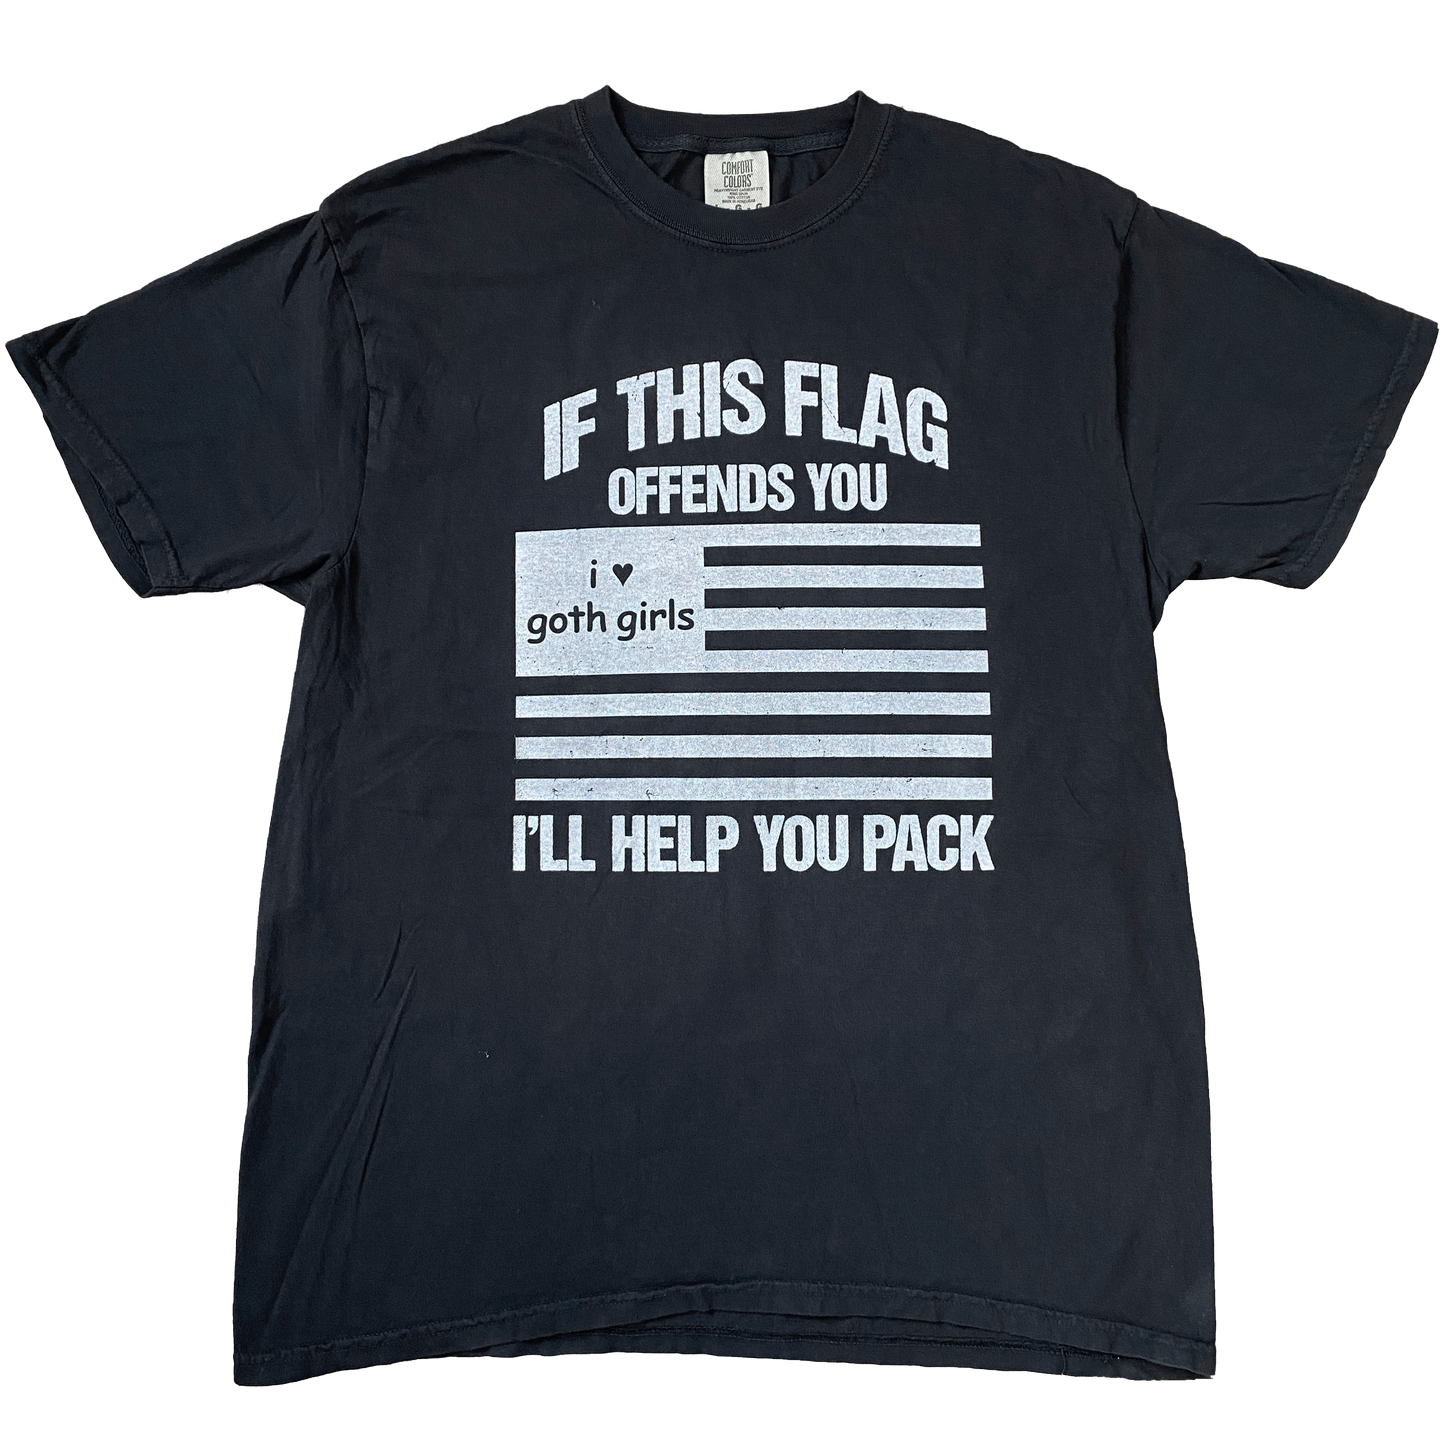 IF THIS FLAG OFFENDS YOU GOTH GIRLS SHIRT